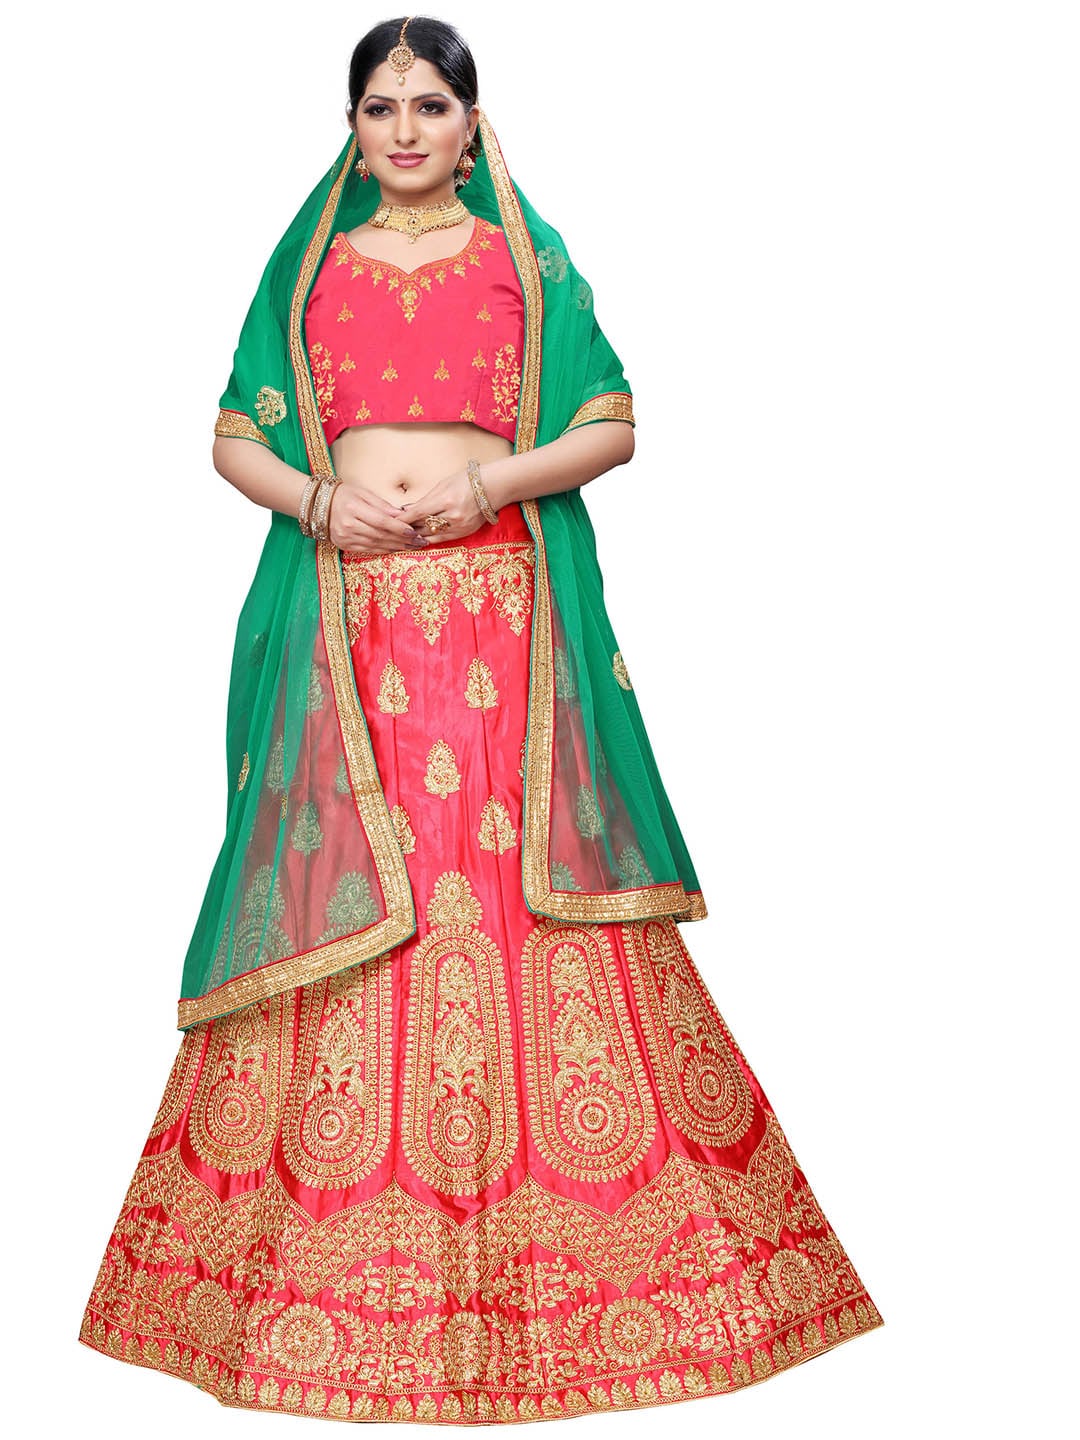 MANVAA Pink & Green Embroidered Beads and Stones Semi-Stitched Lehenga & Unstitched Blouse With Dupatta Price in India